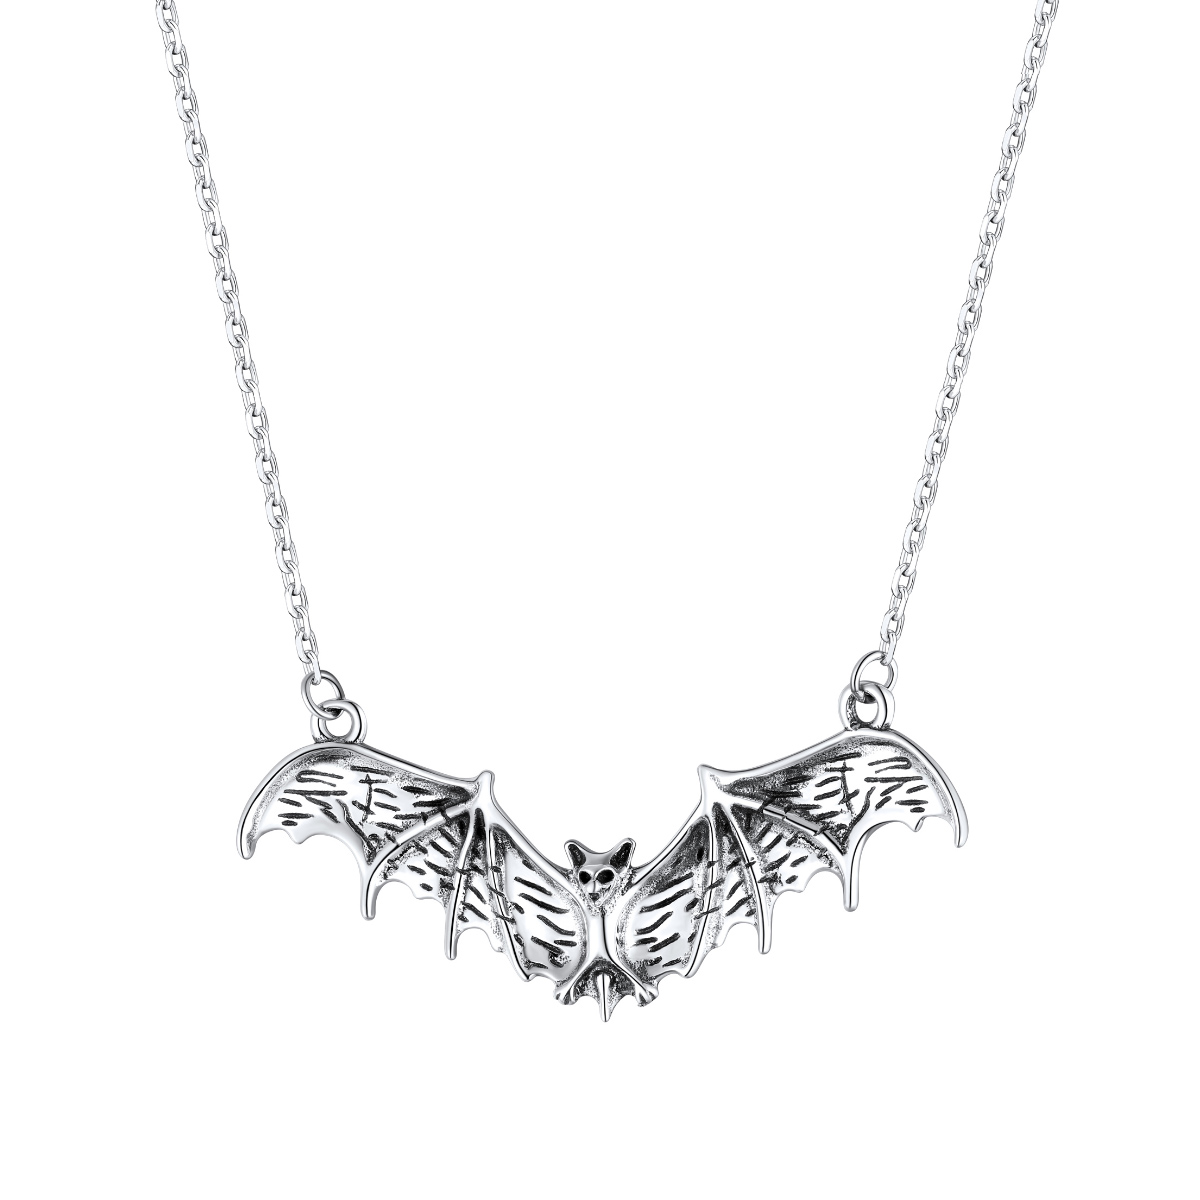 ChicSilver 925 Sterling Silver Halloween Necklace Bat Necklace For Women